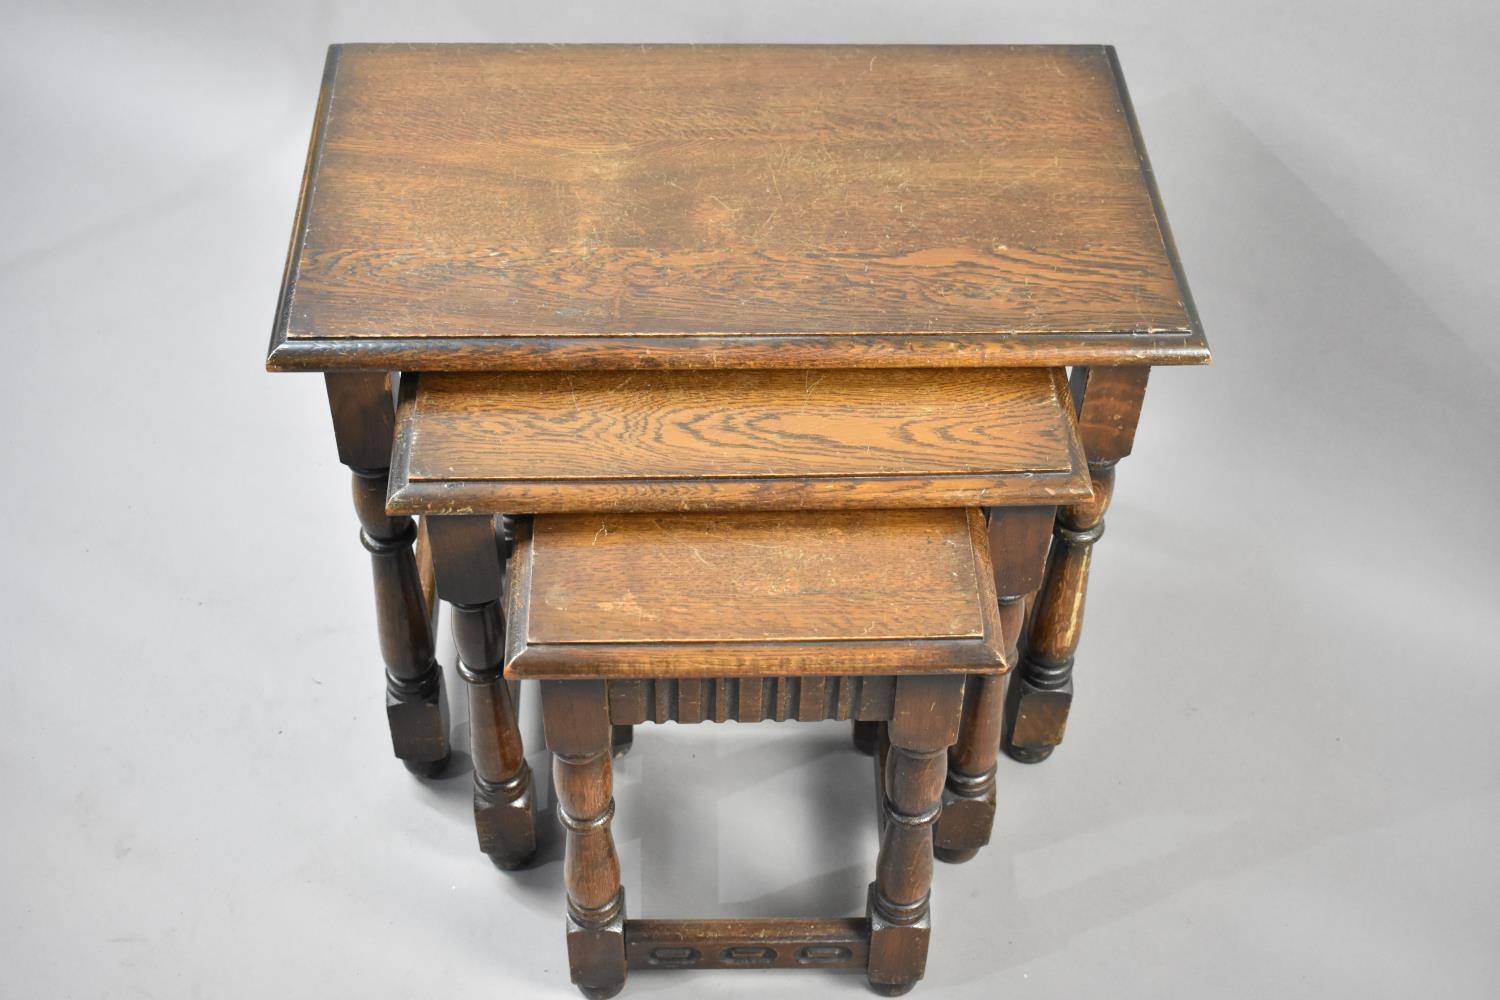 A Mid 20th Century Oak Nest of Three Tables with Turned Supports, Largest Table 61x36.5x47cms High - Image 2 of 2